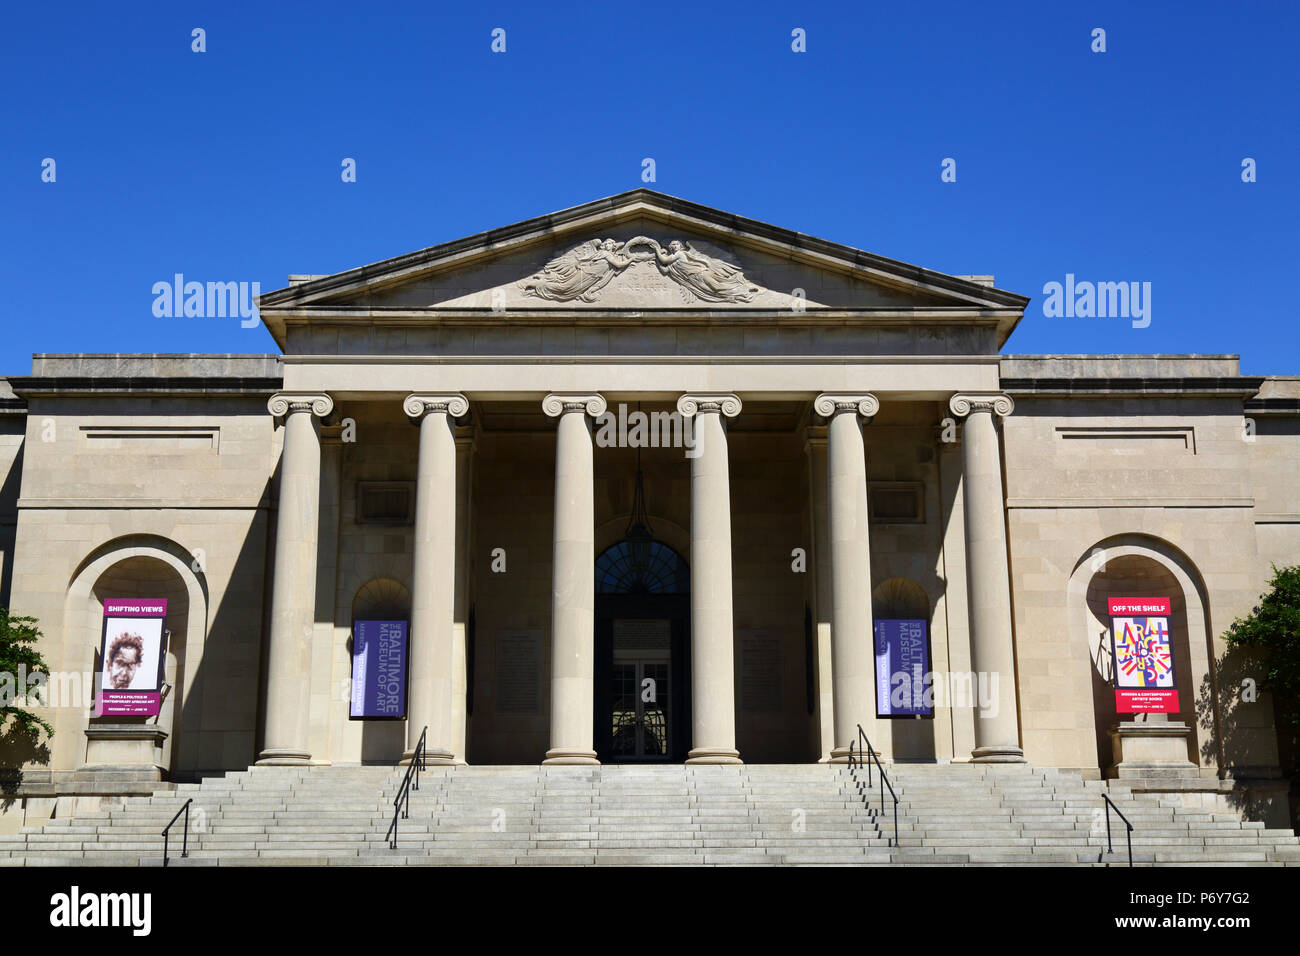 Neoclassical style main entrance of the Baltimore Museum of Art